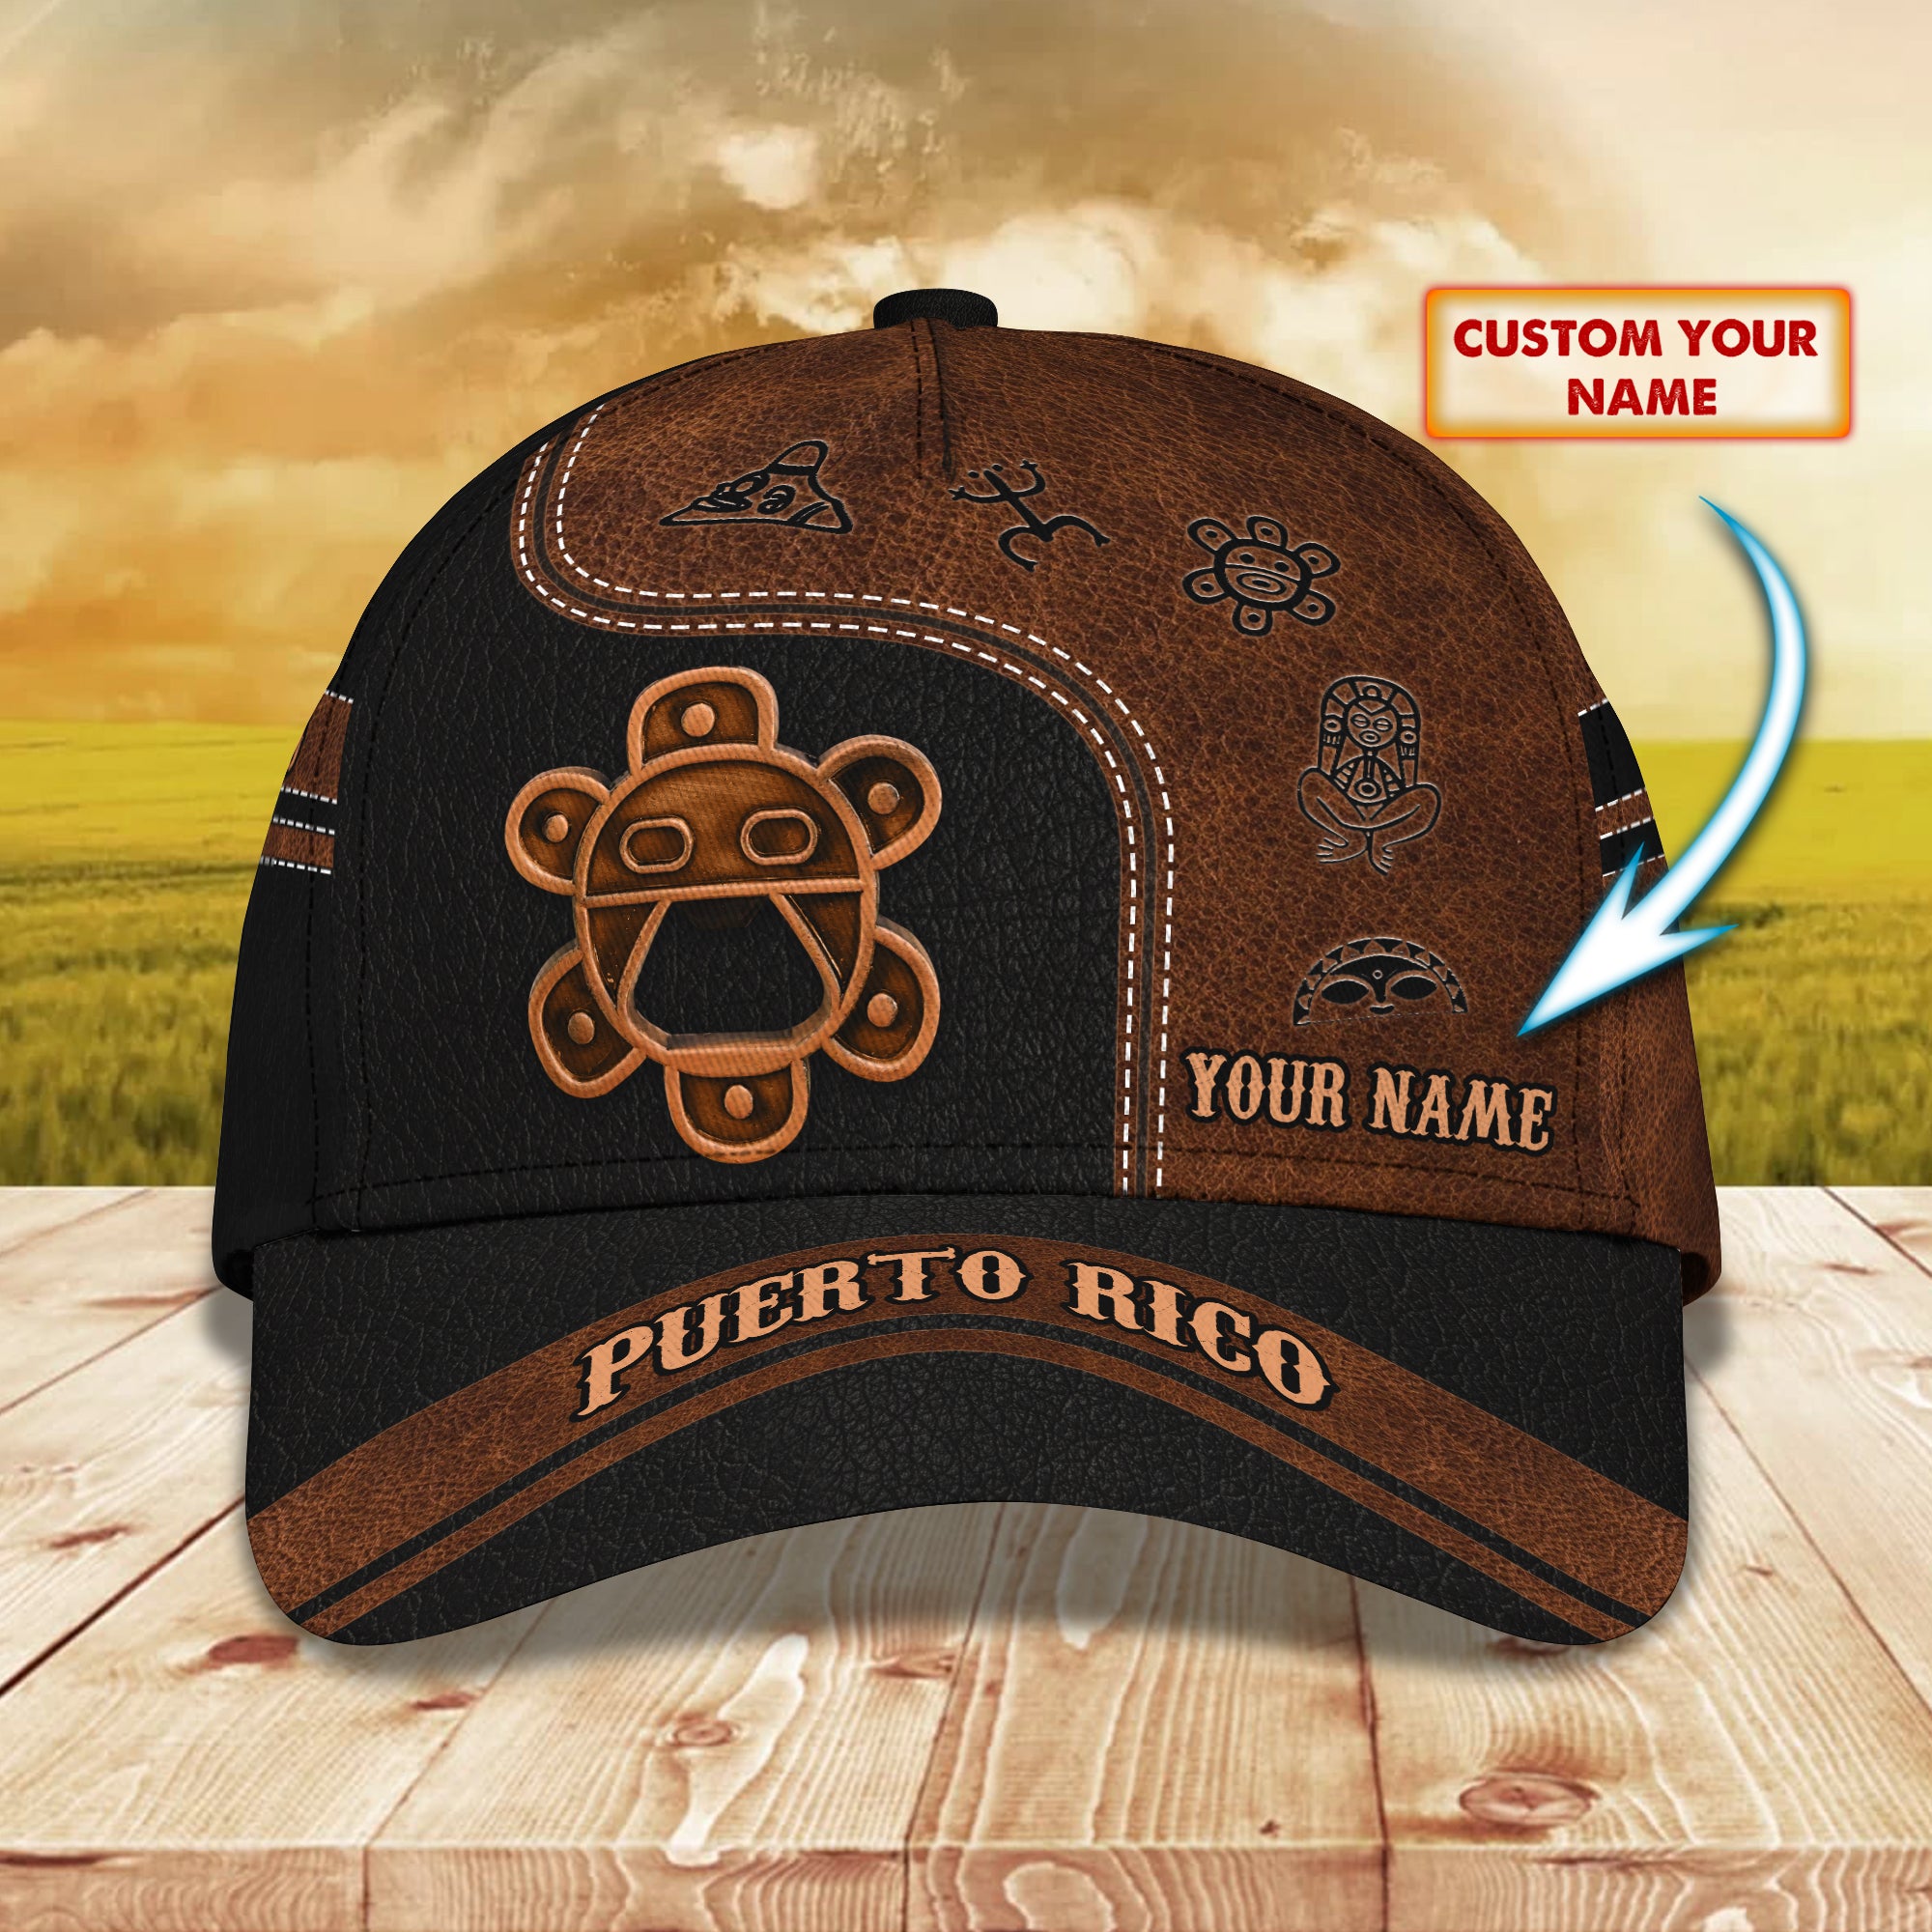 Puerto Rico - Personalized Name Cap - tra96